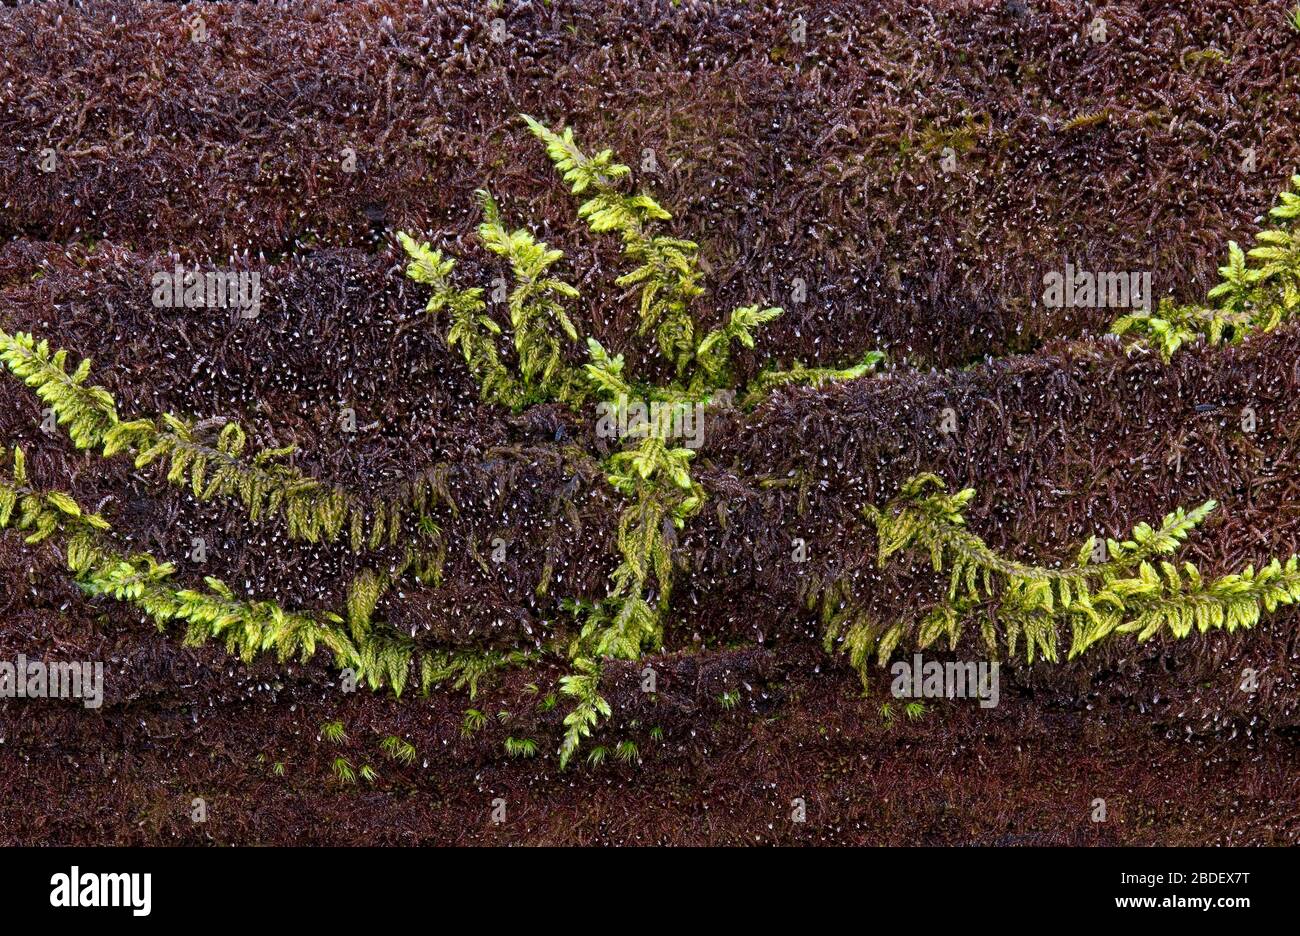 Hypnum moss growing on a decaying log in Pennsylvania’s Pocono Mountains. Stock Photo